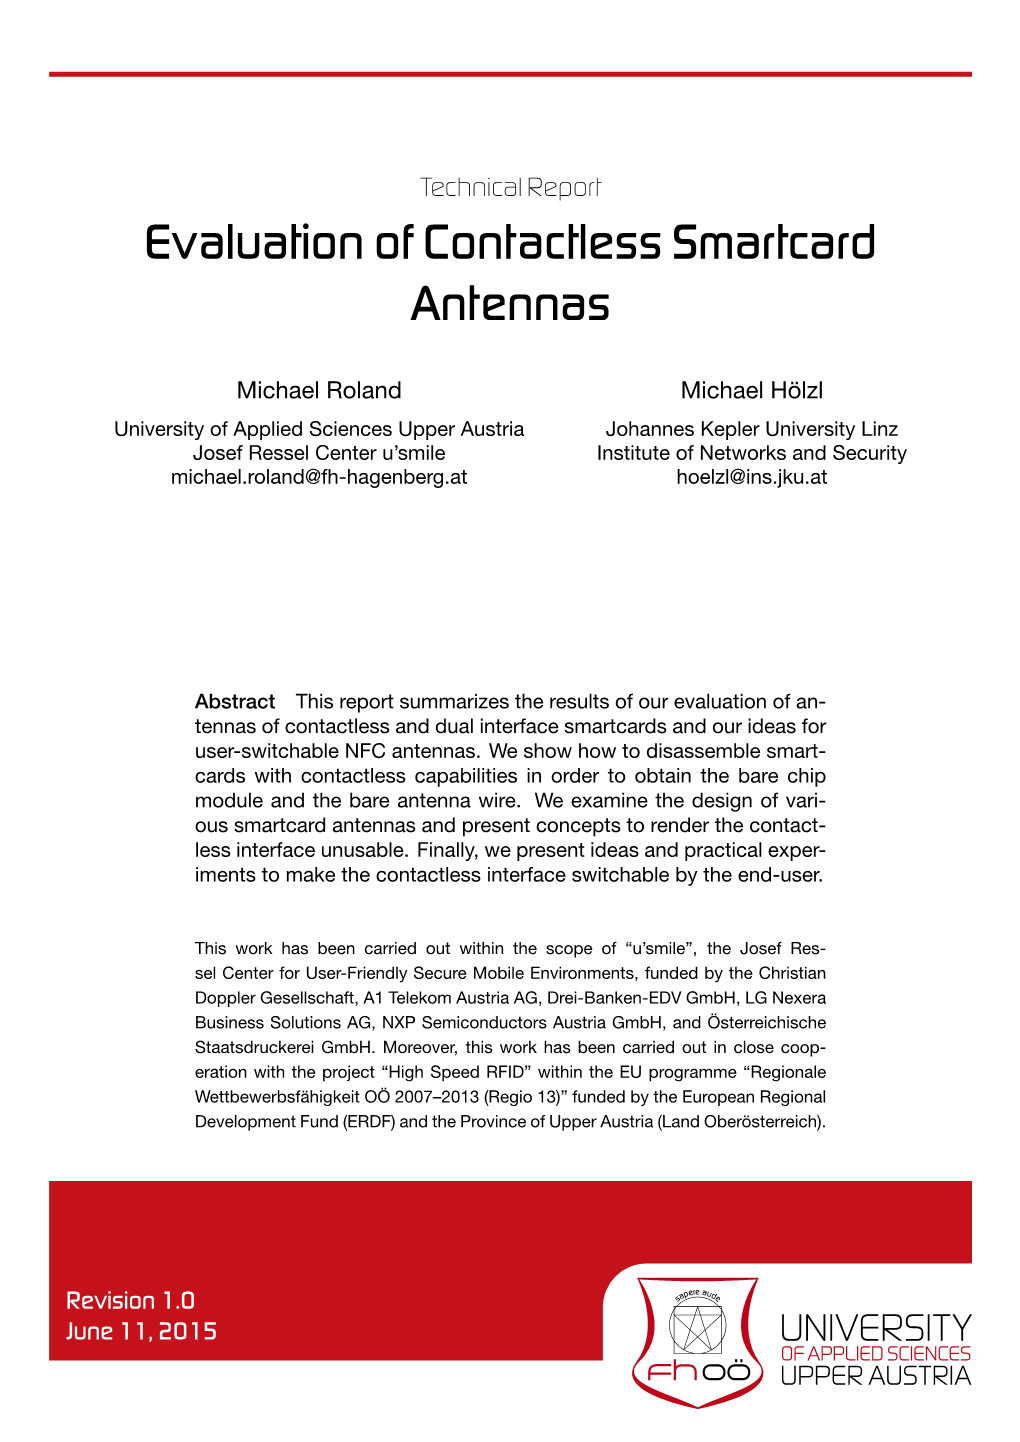 Technical Report: Evaluation of Contactless Smartcard Antennas